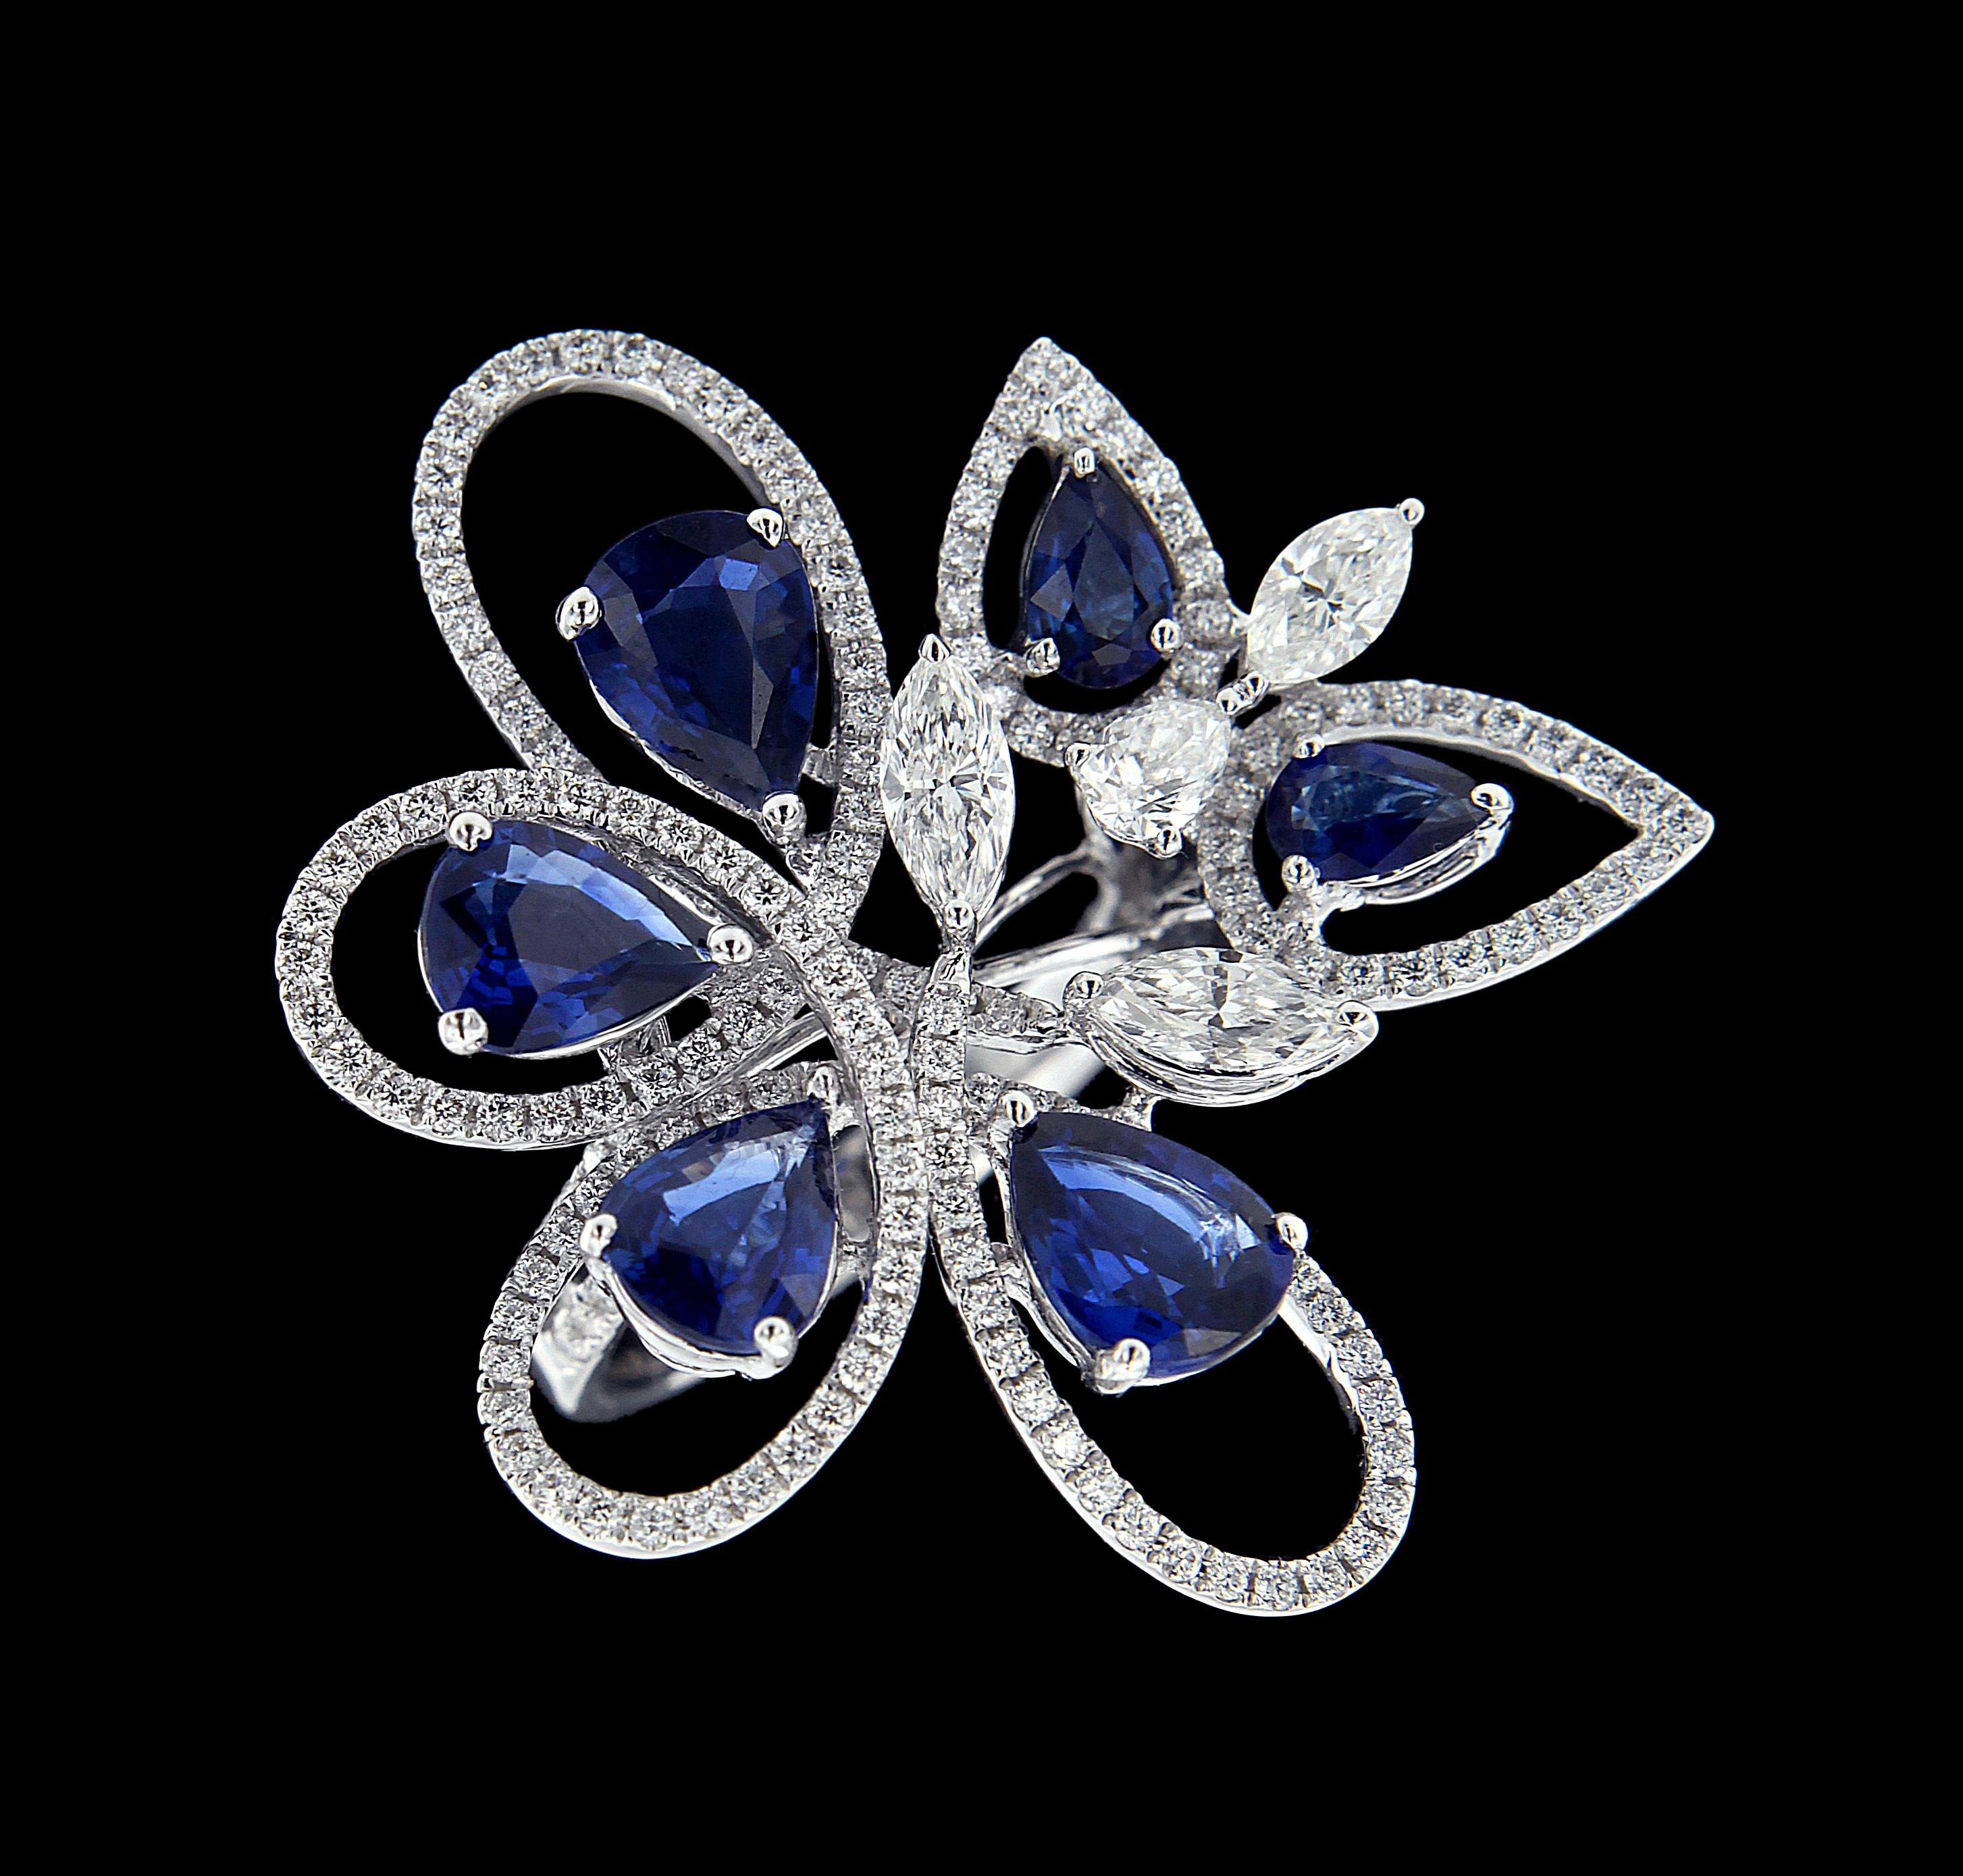 Pear Cut Charming 18 Karat White Gold, Diamond and Sapphire Rings For Sale